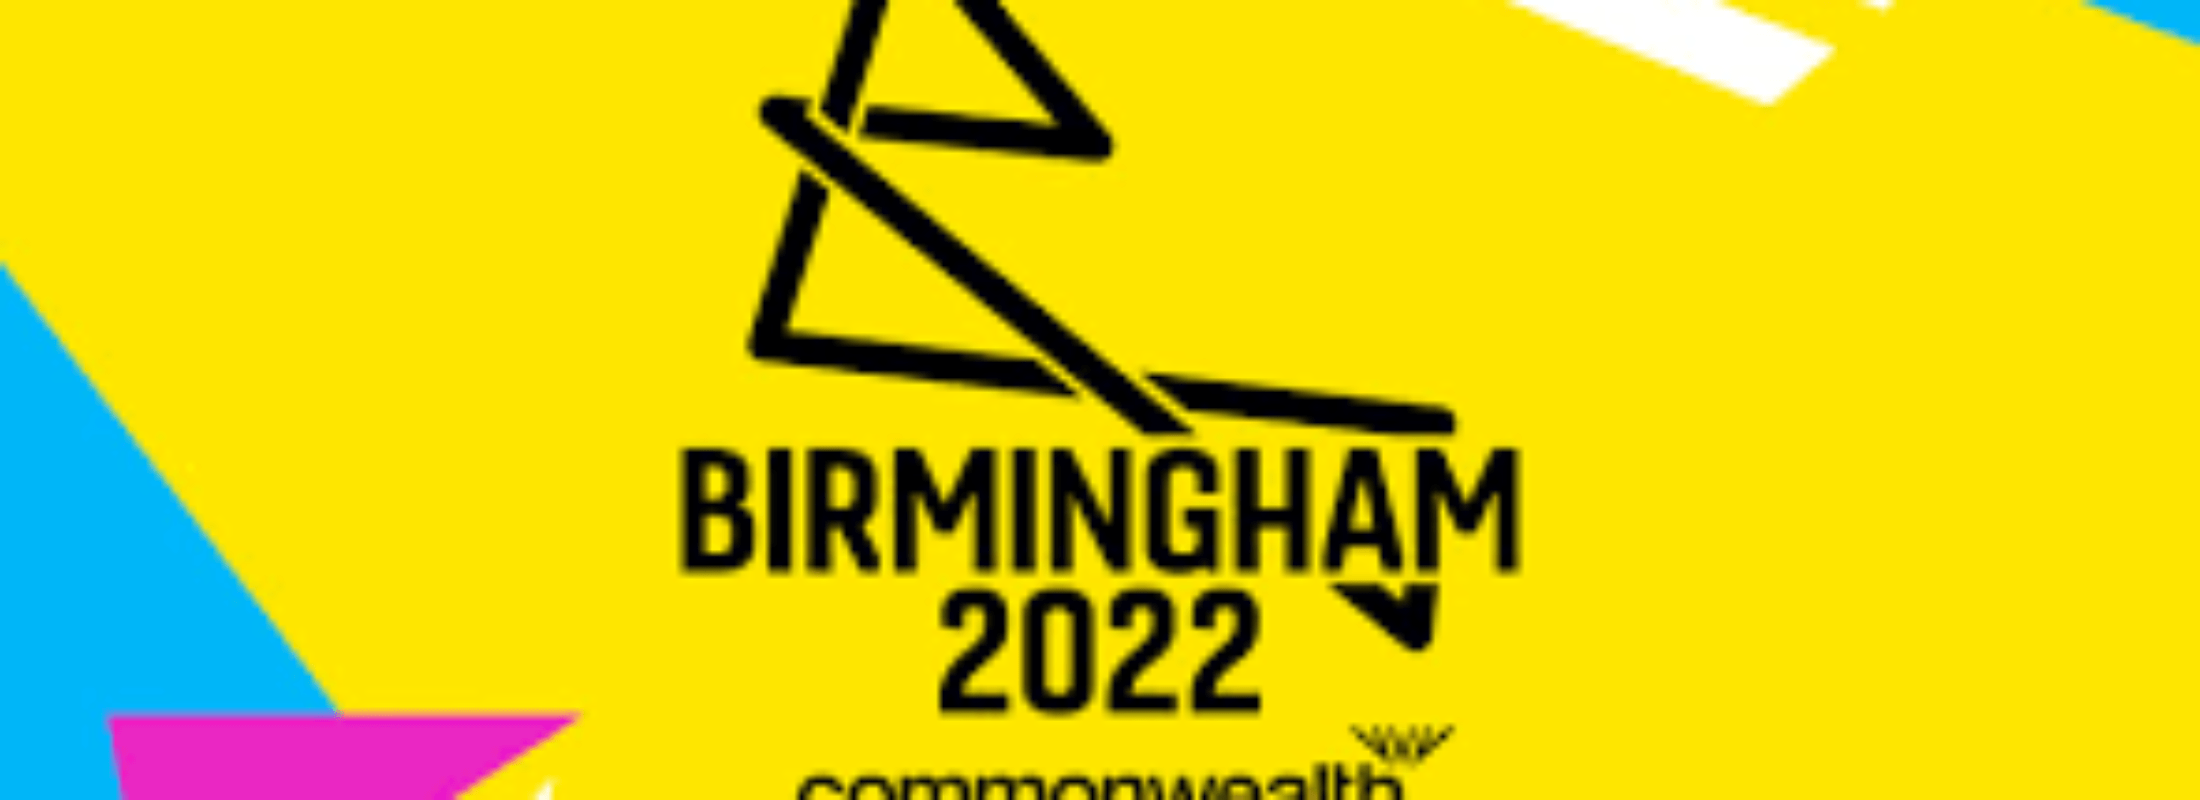 Commonwealth Games 2022